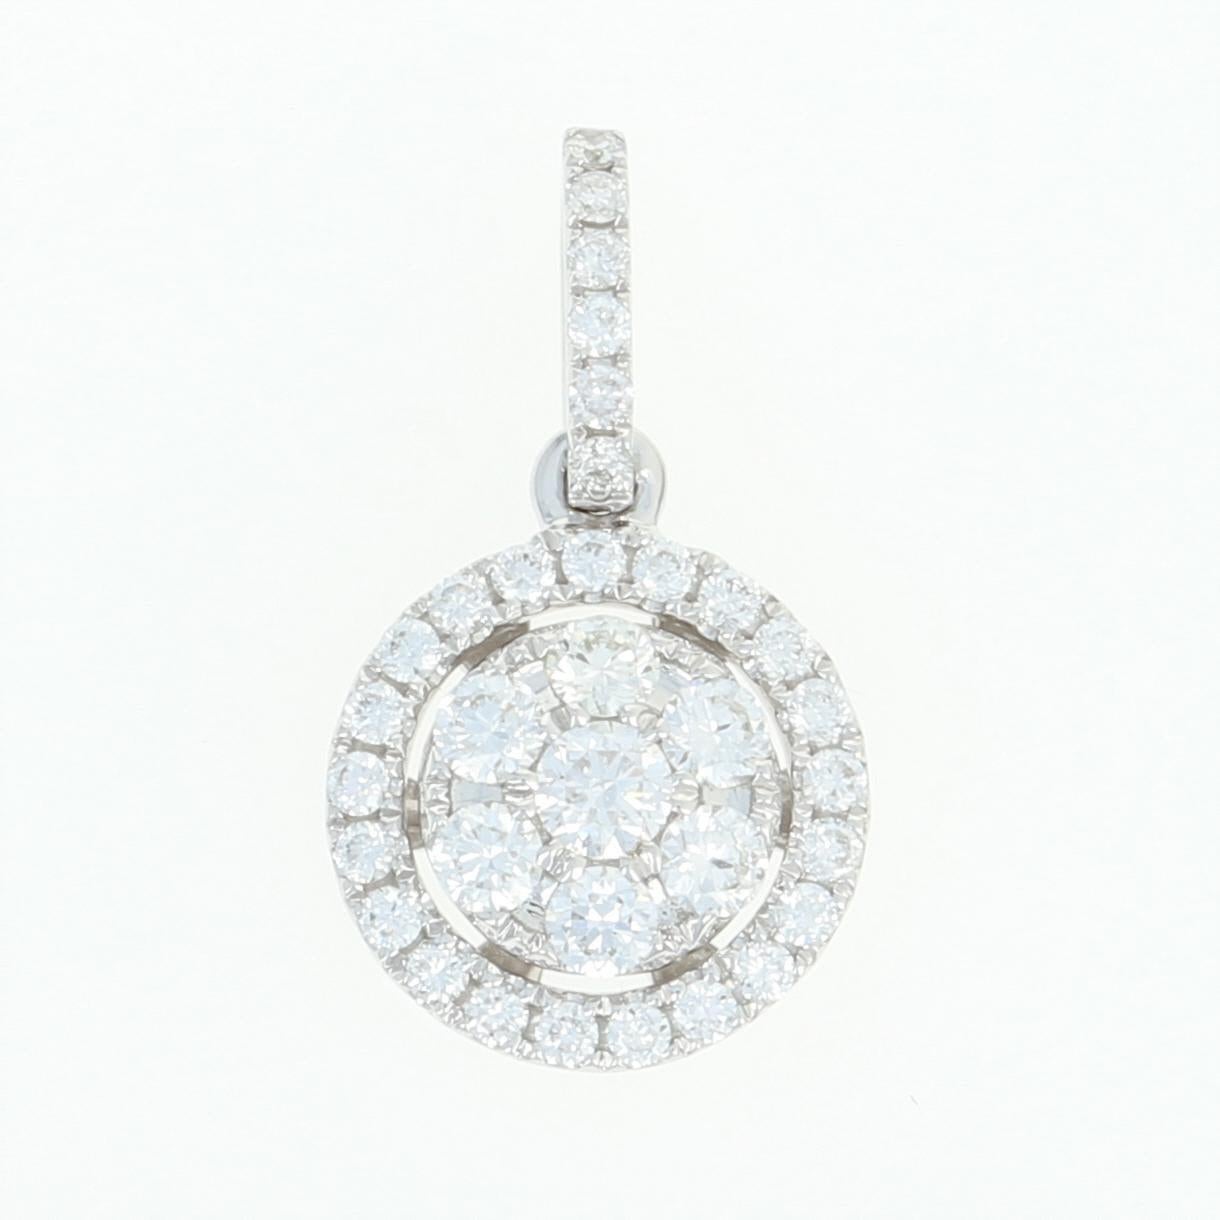 Sparkling like a star-lit sky, this luminous piece will light up any special occasion! Fashioned in 14k white gold, this NEW pendant showcases a glittering cluster of icy white diamonds encircled by a diamond halo and accompanied by shimmering